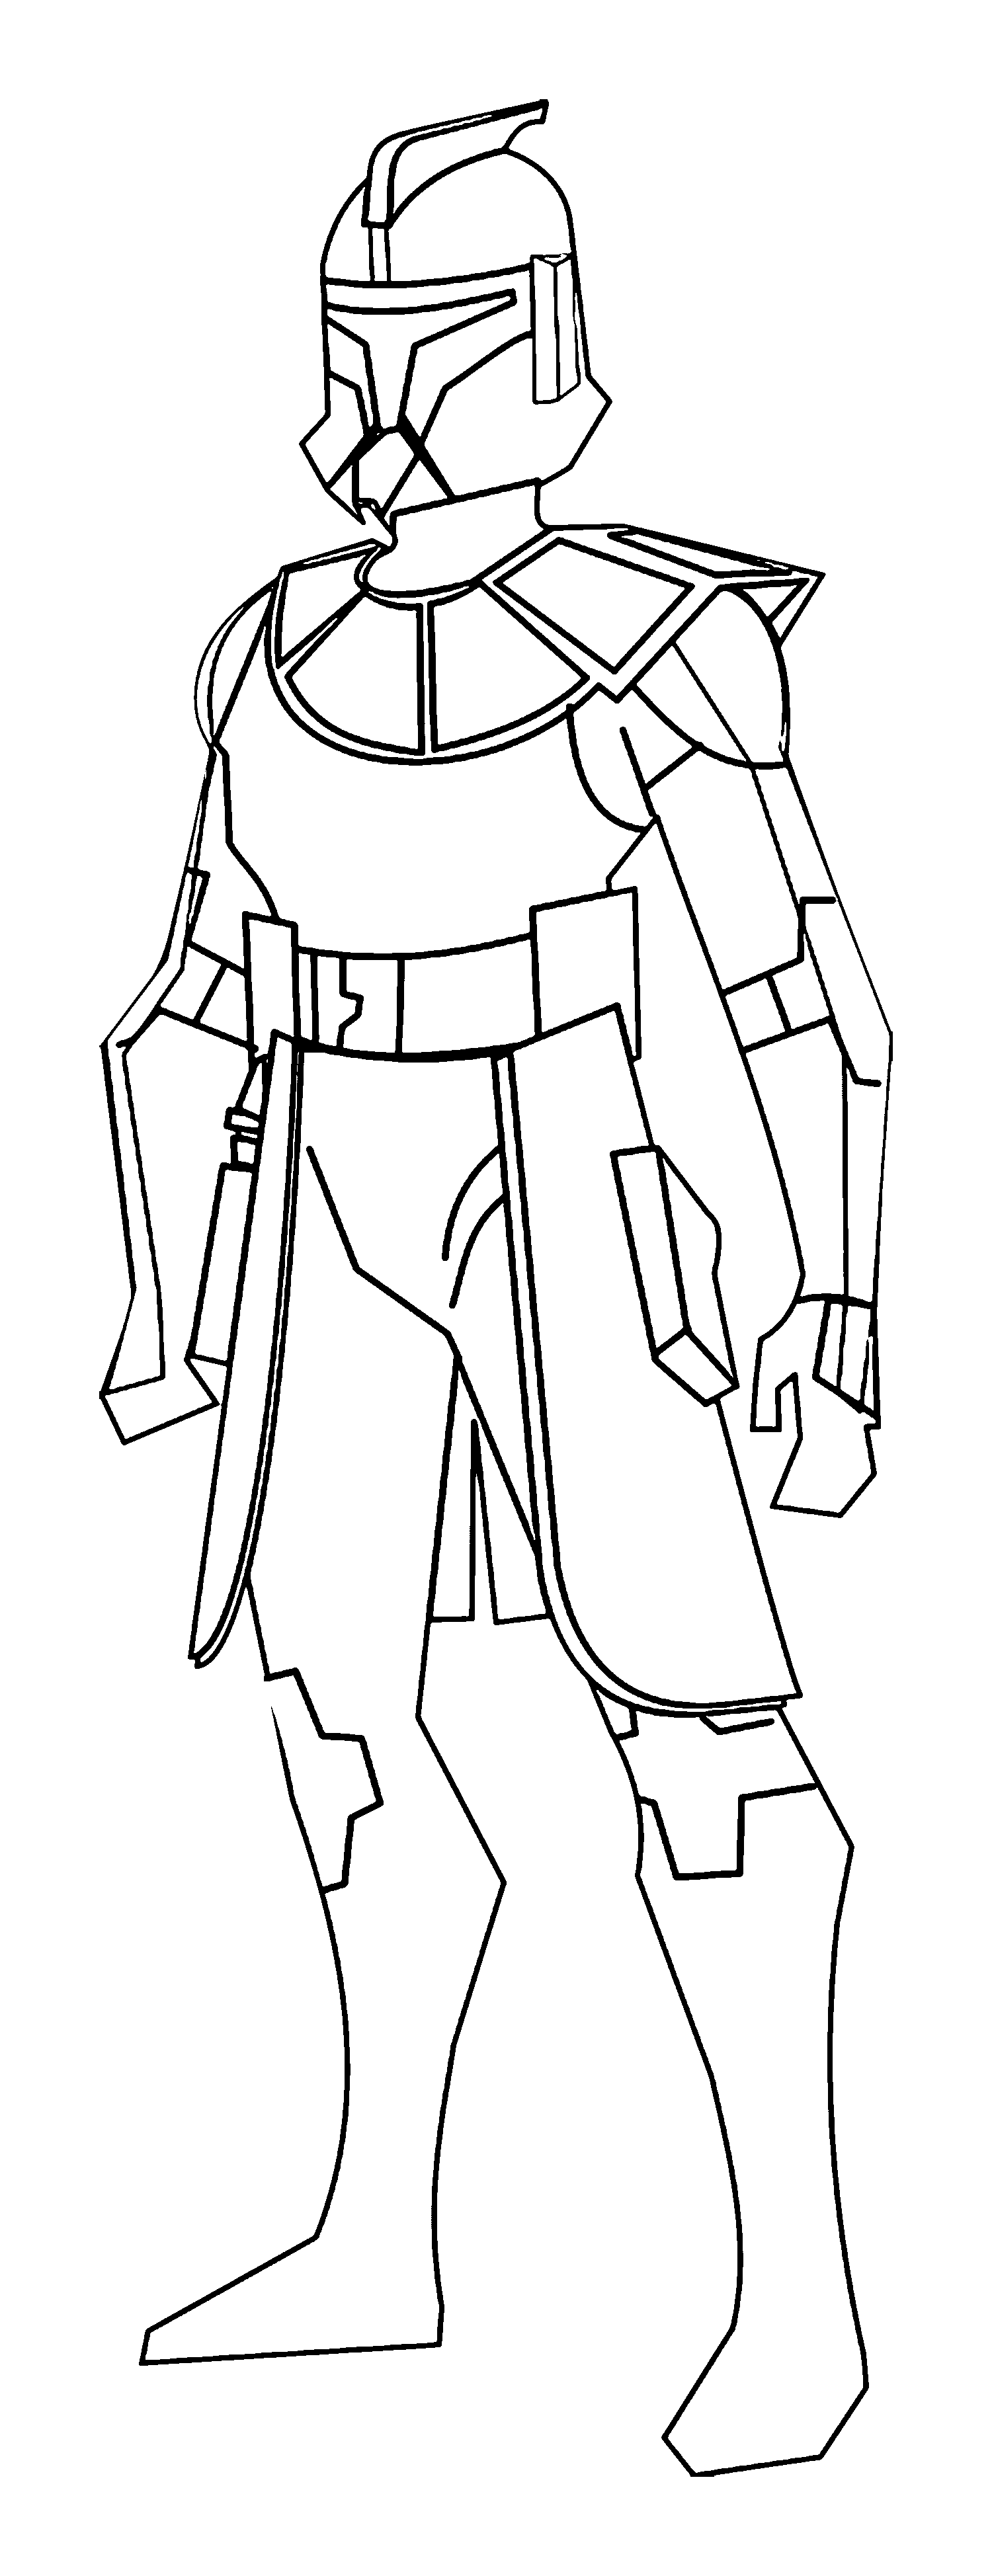 Star Wars Clone Storm Trooper Coloring Page | 